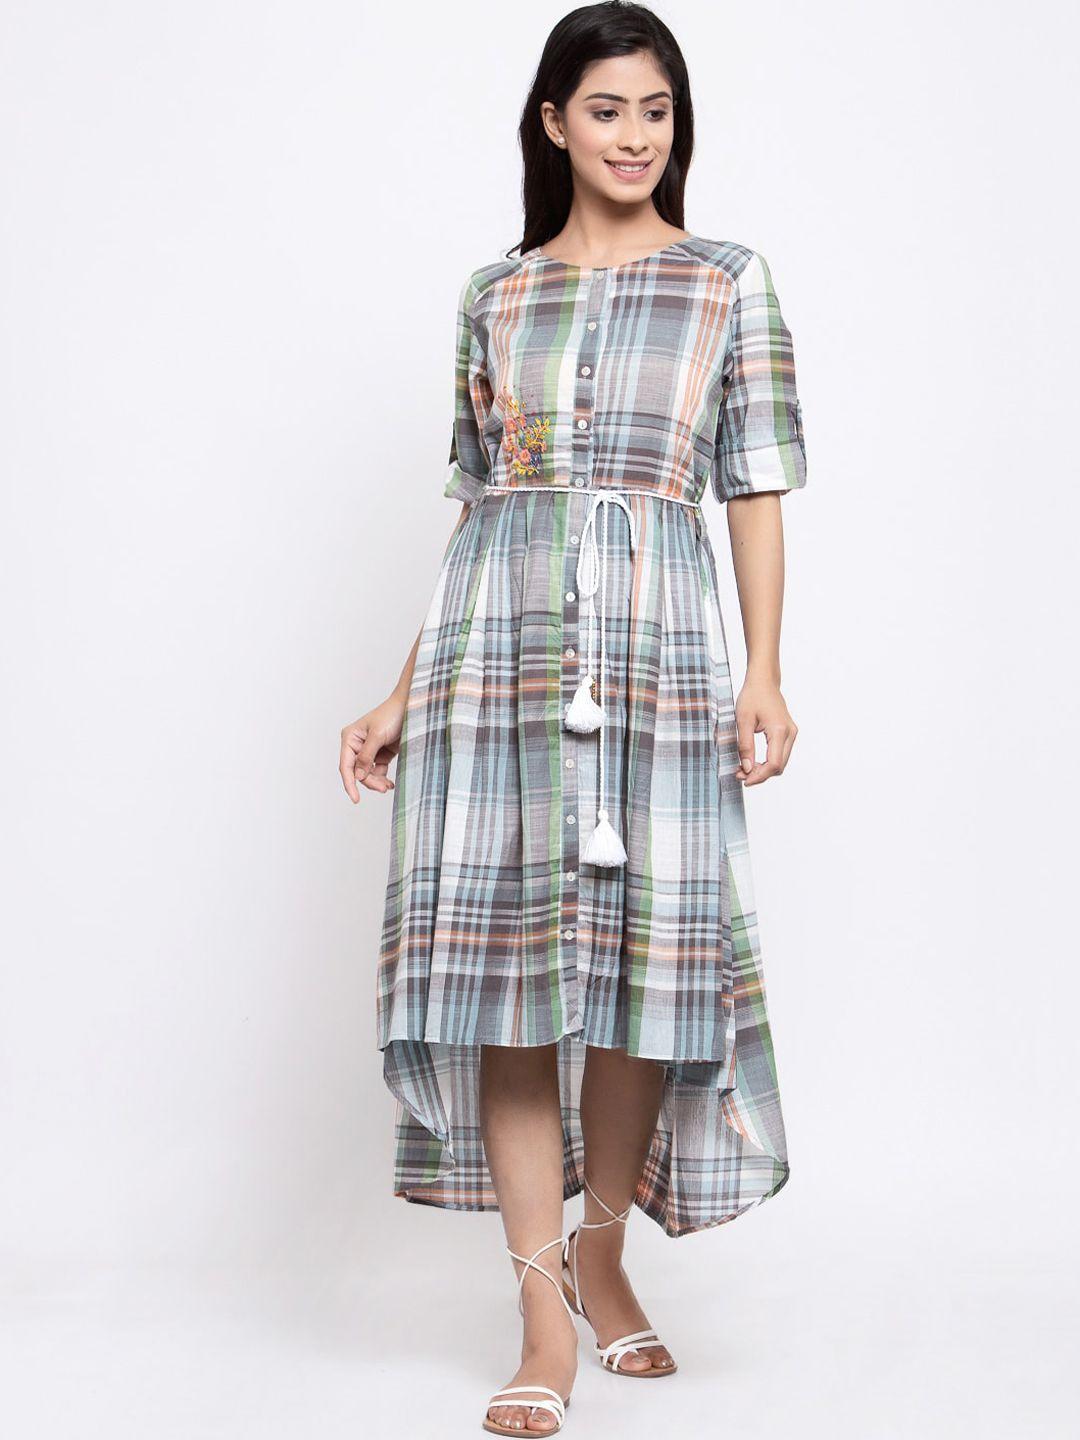 terquois-women-green-checked-cotton-a-line-dress